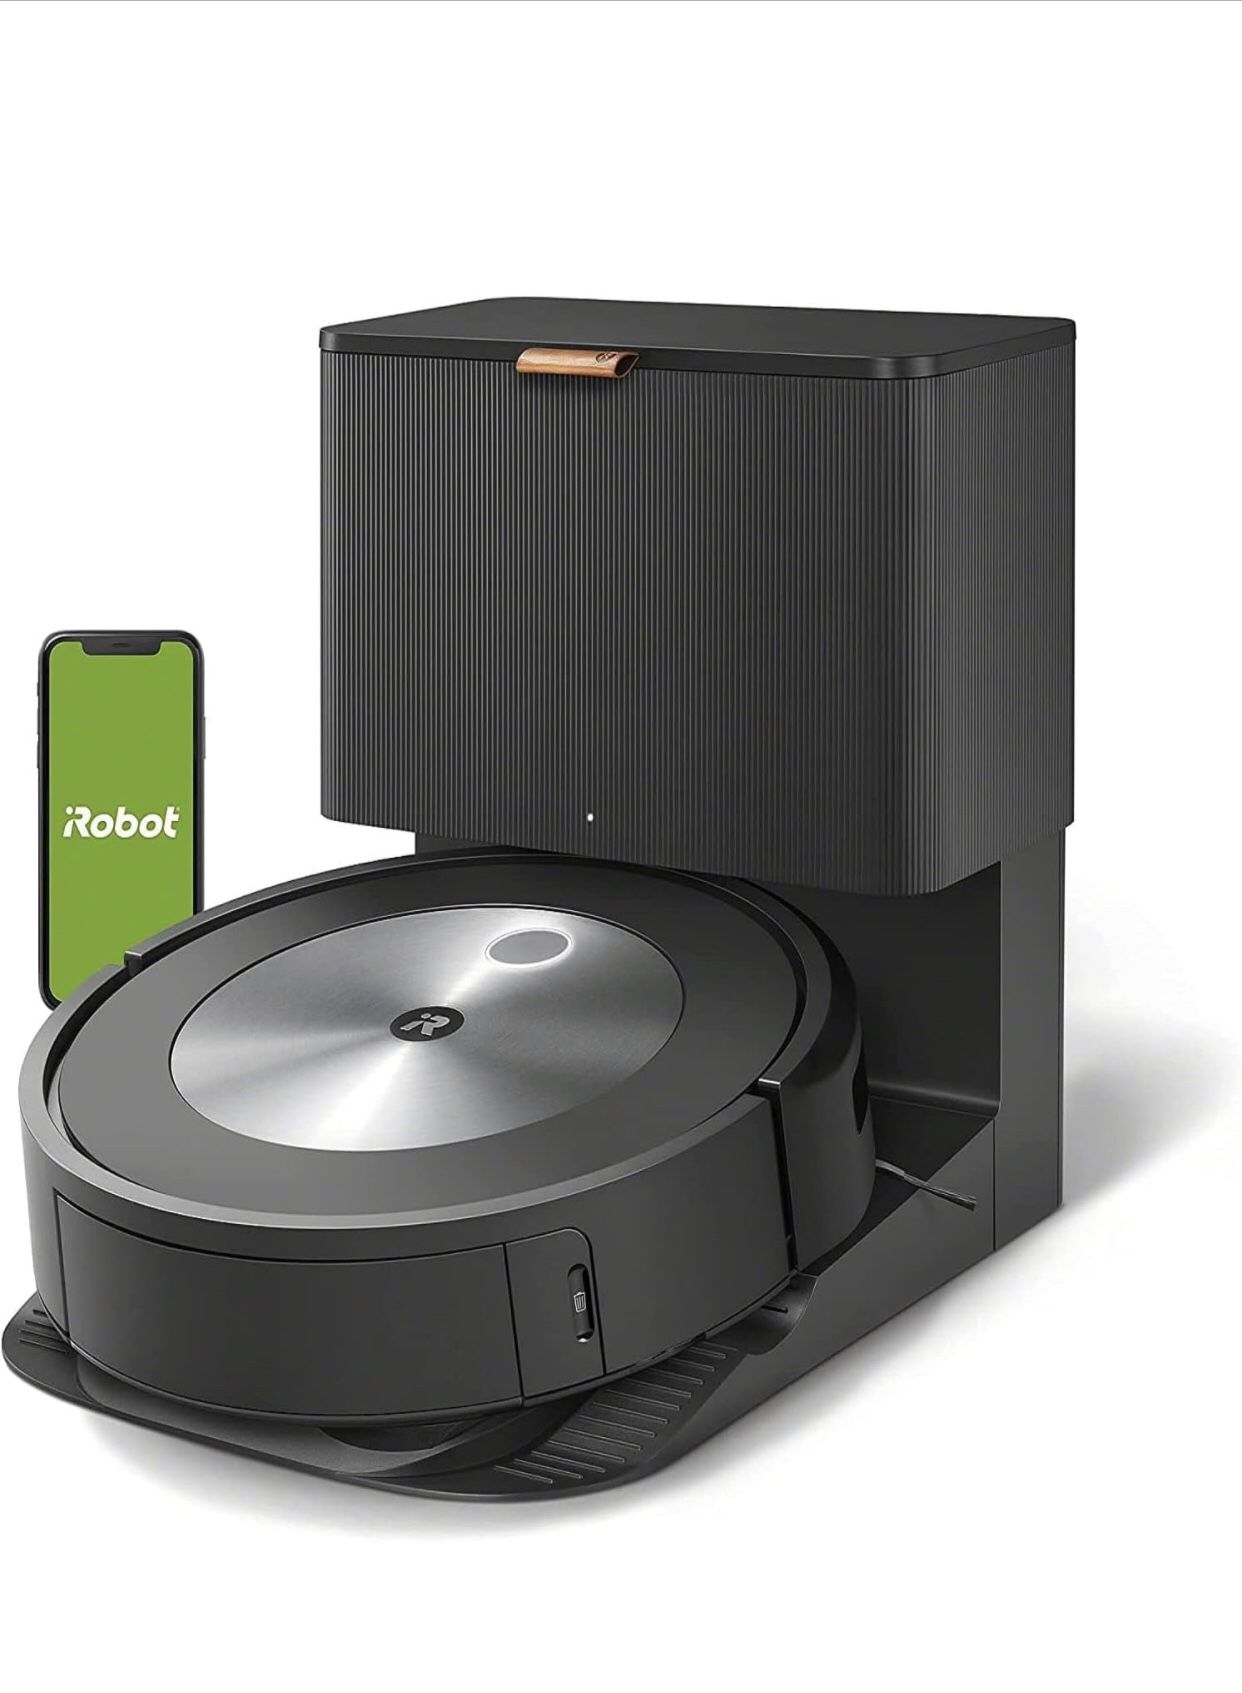 iRobot Roomba j7+ (7550) Self-Emptying Robot Vacuum – Avoids Common Obstacles Like Socks, Shoes, and Pet Waste, Empties Itself for 60 Days, Smart Mapp